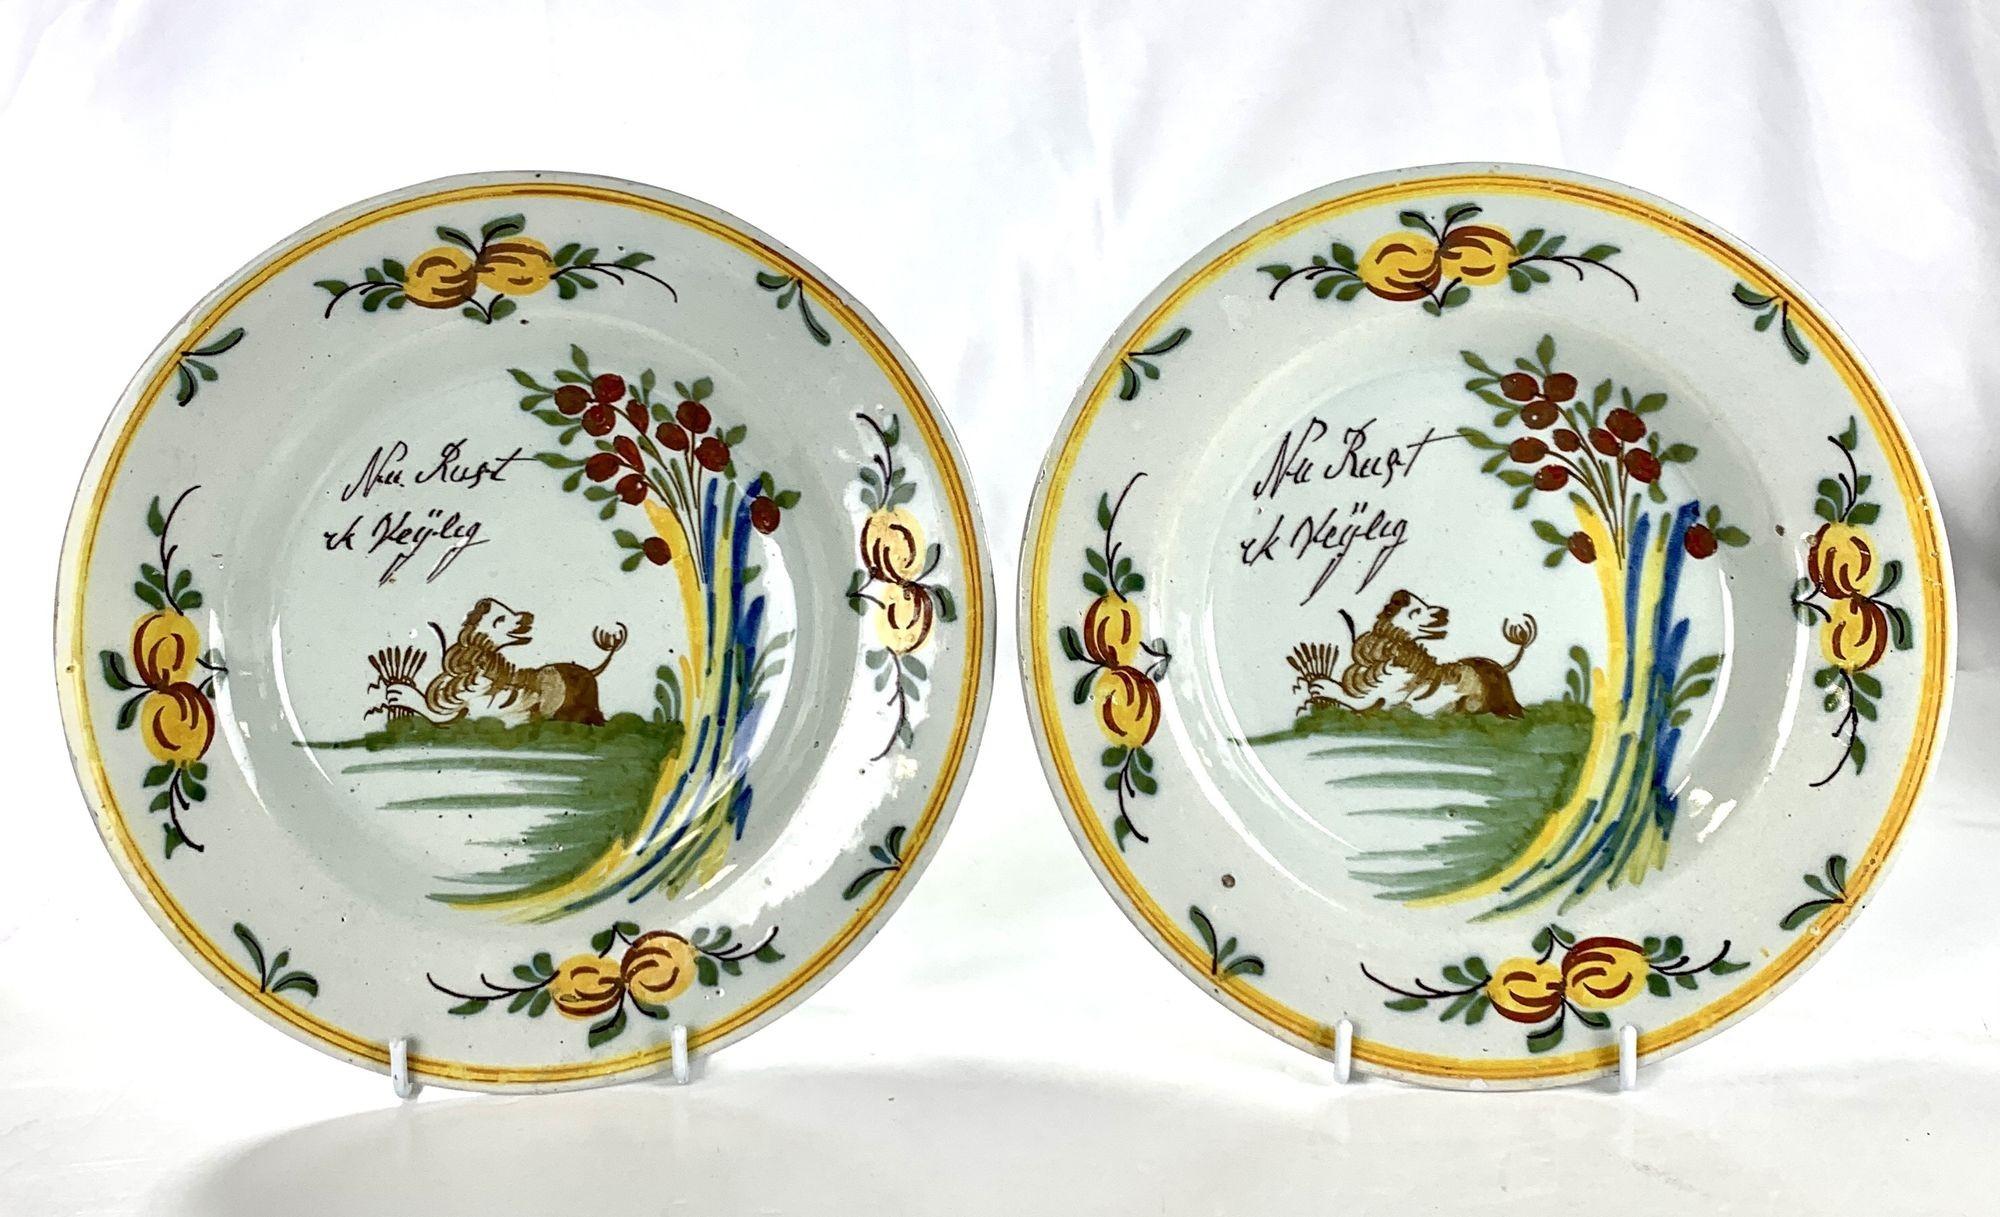 This pair of Delft dishes was hand-painted in the Netherlands in the 18th century, circa 1780.
We see a lion and the motto Nu Rust ik Veilig,  